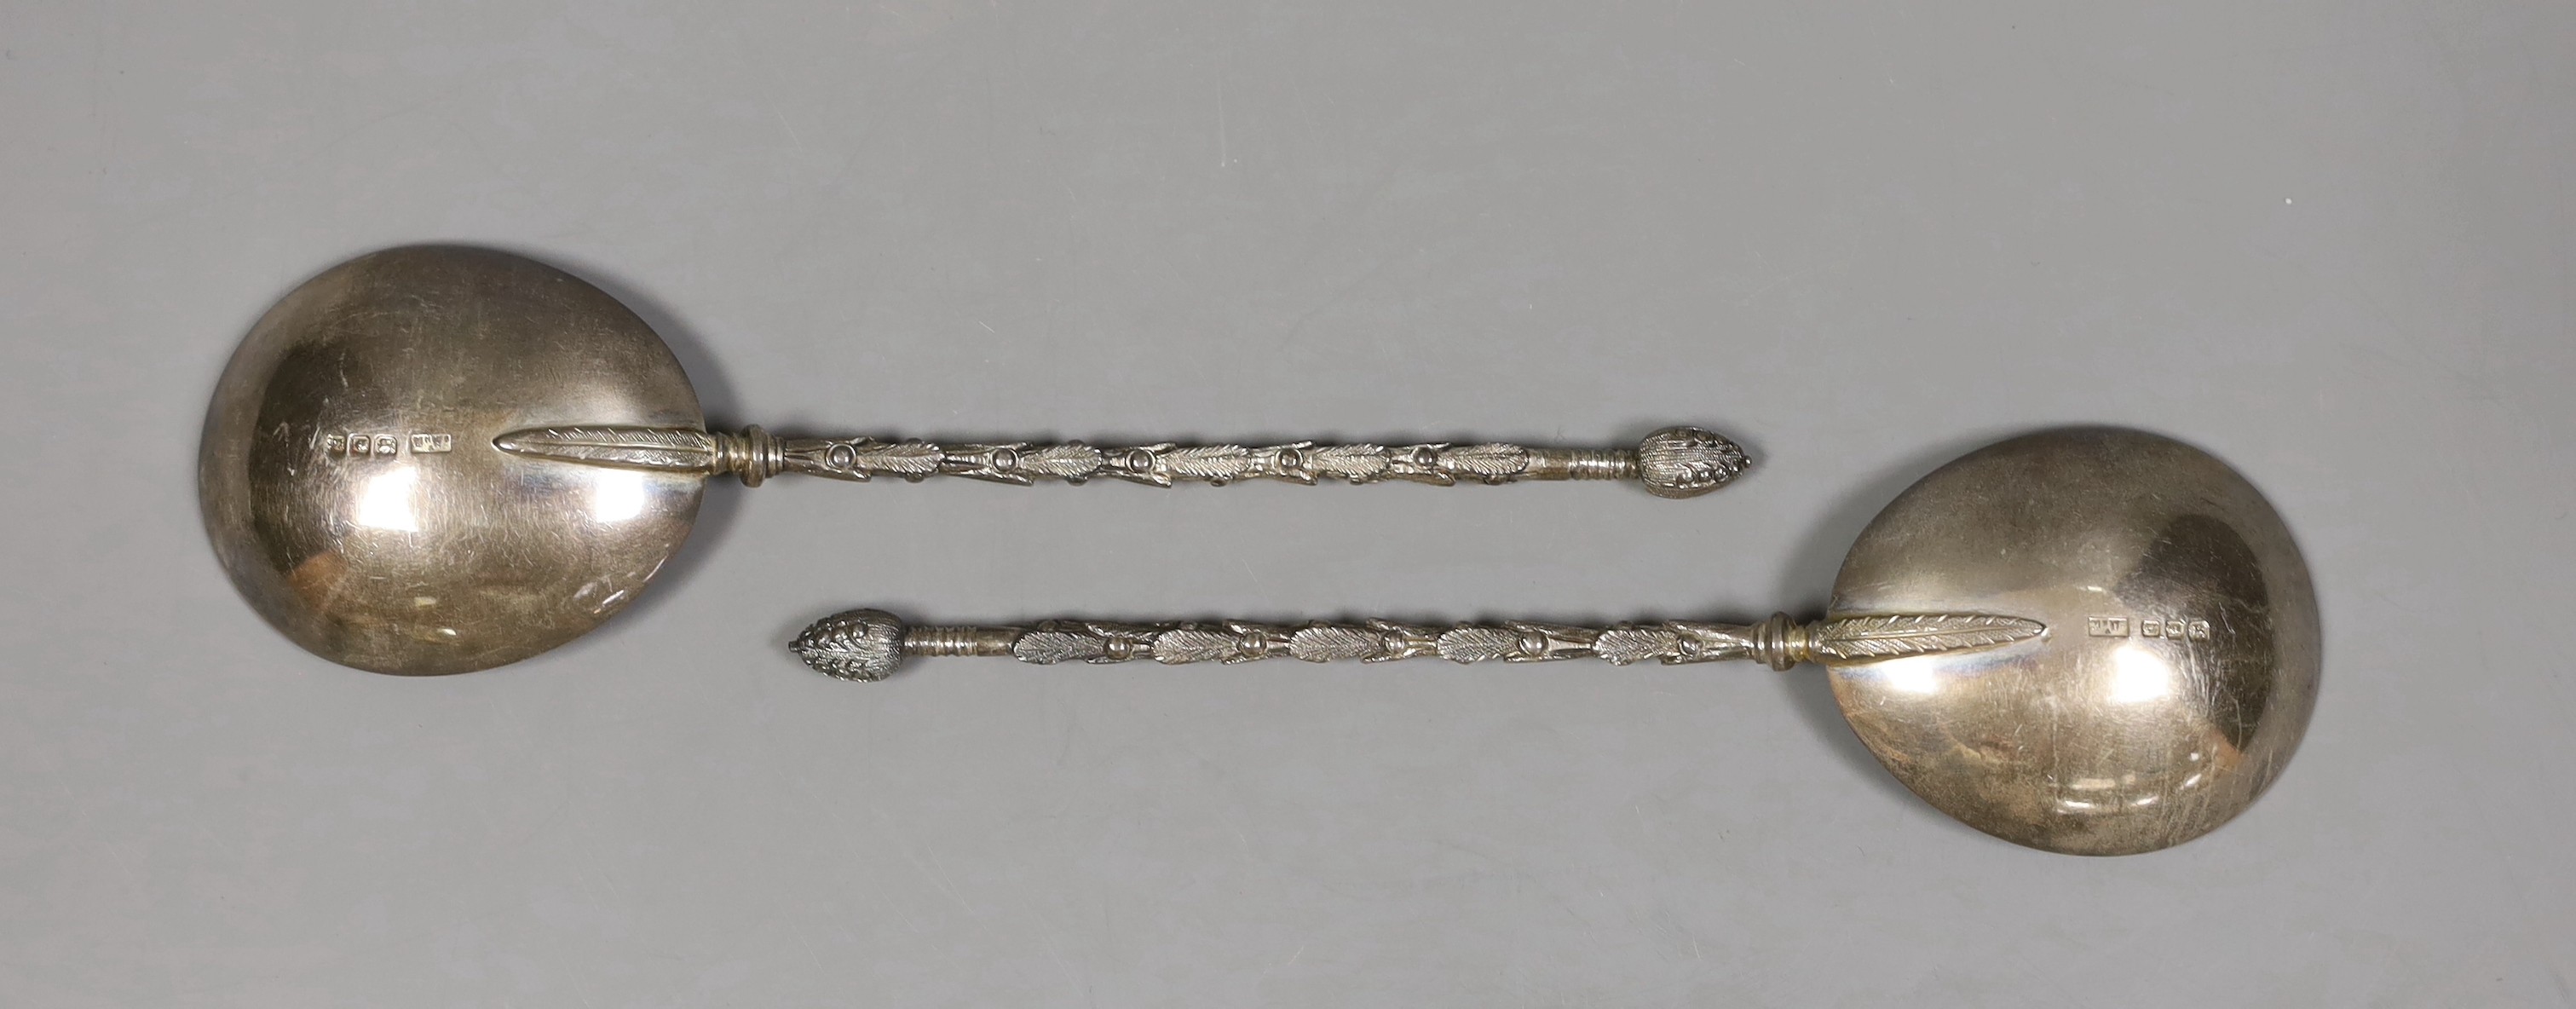 A pair of George V silver serving spoons, with ornate stems, Mappin & Webb, London, 1918/19, 19.6cm, 120 grams.